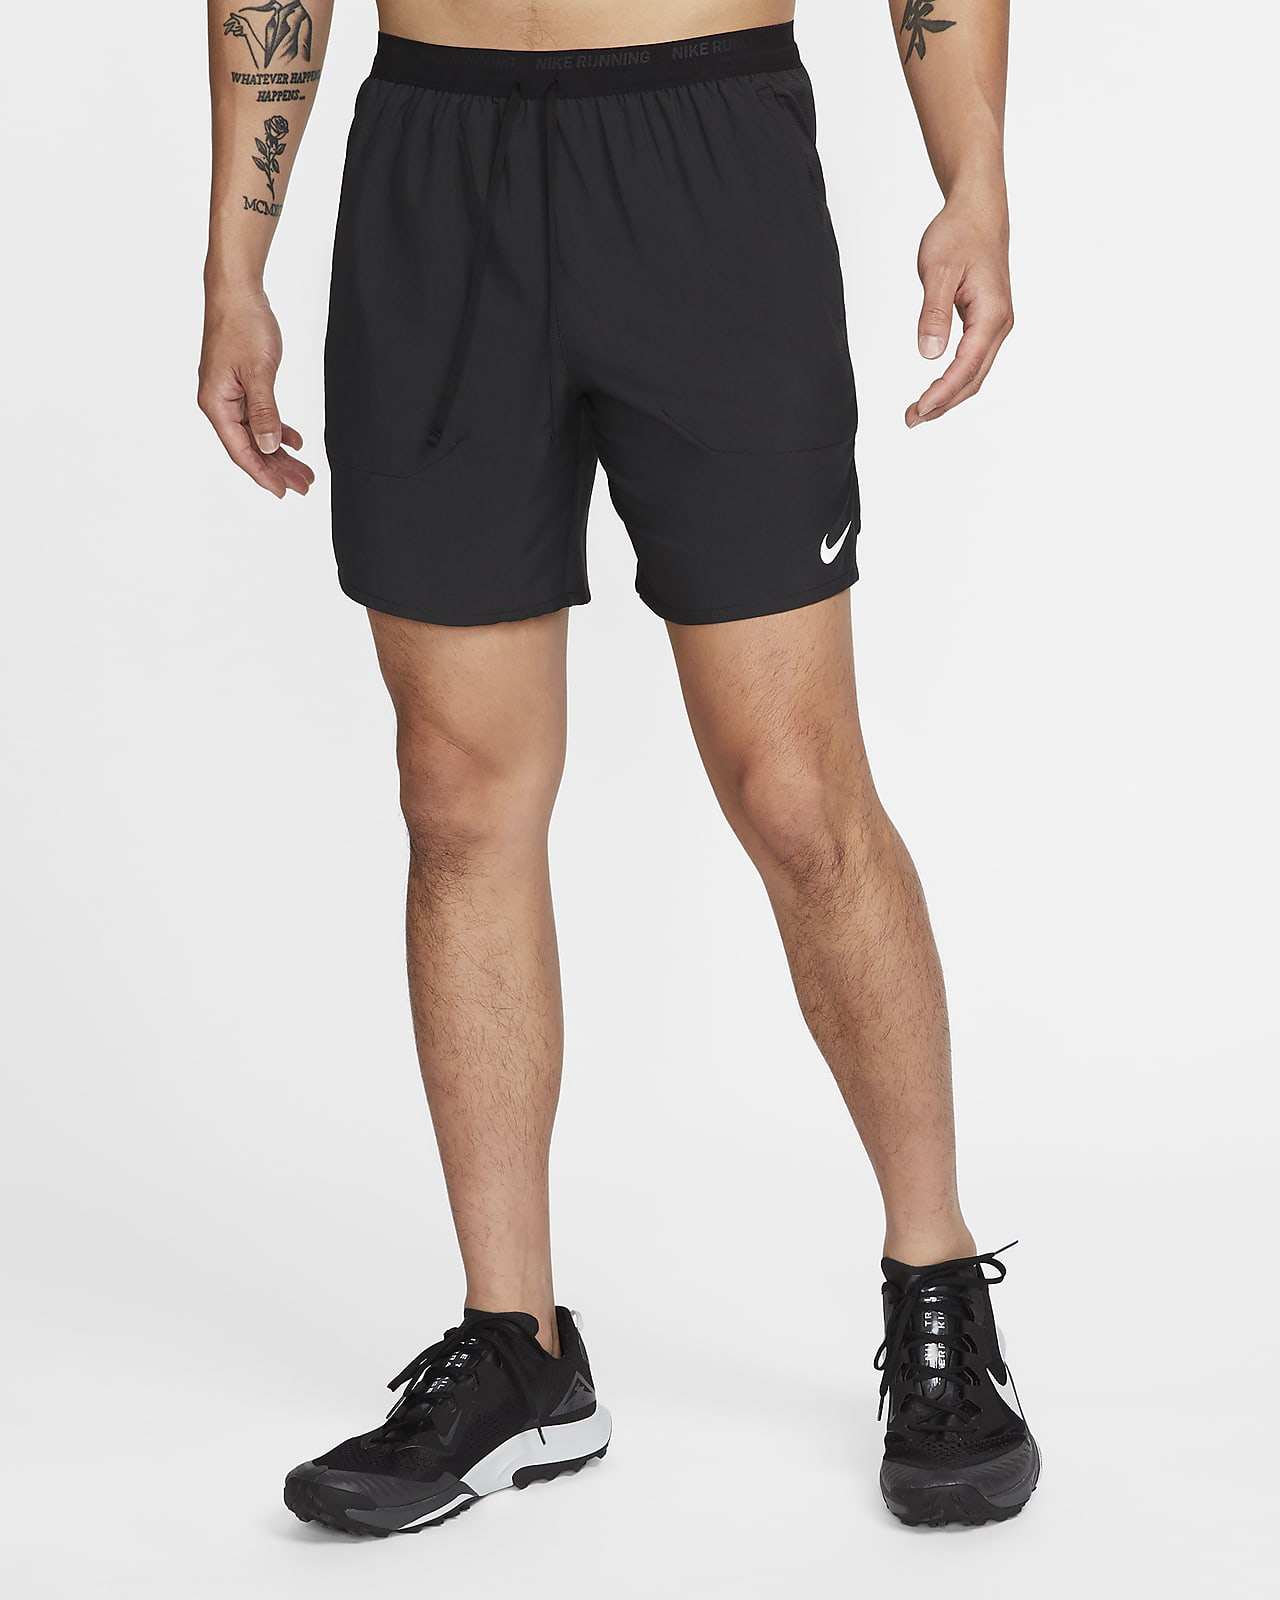 Nike Dri-FIT Stride Men's 7" Brief-Lined Running Shorts